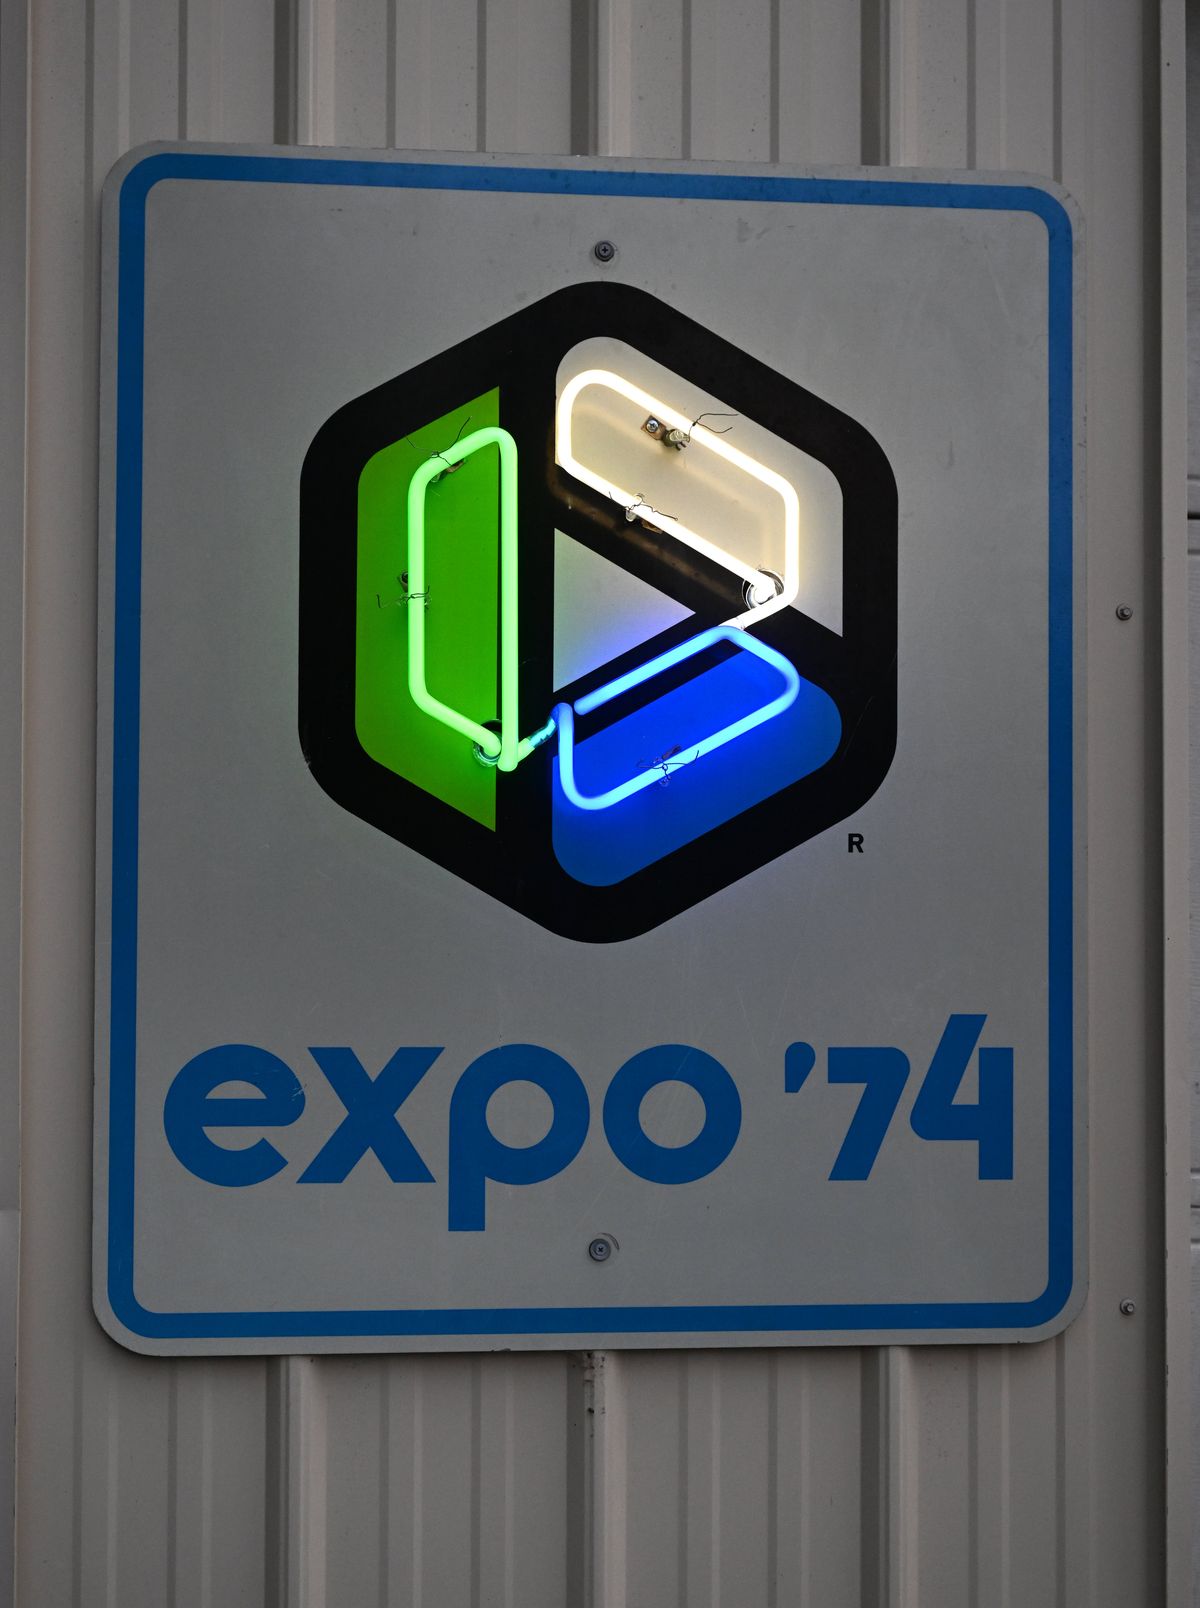 This sign recalling Expo 